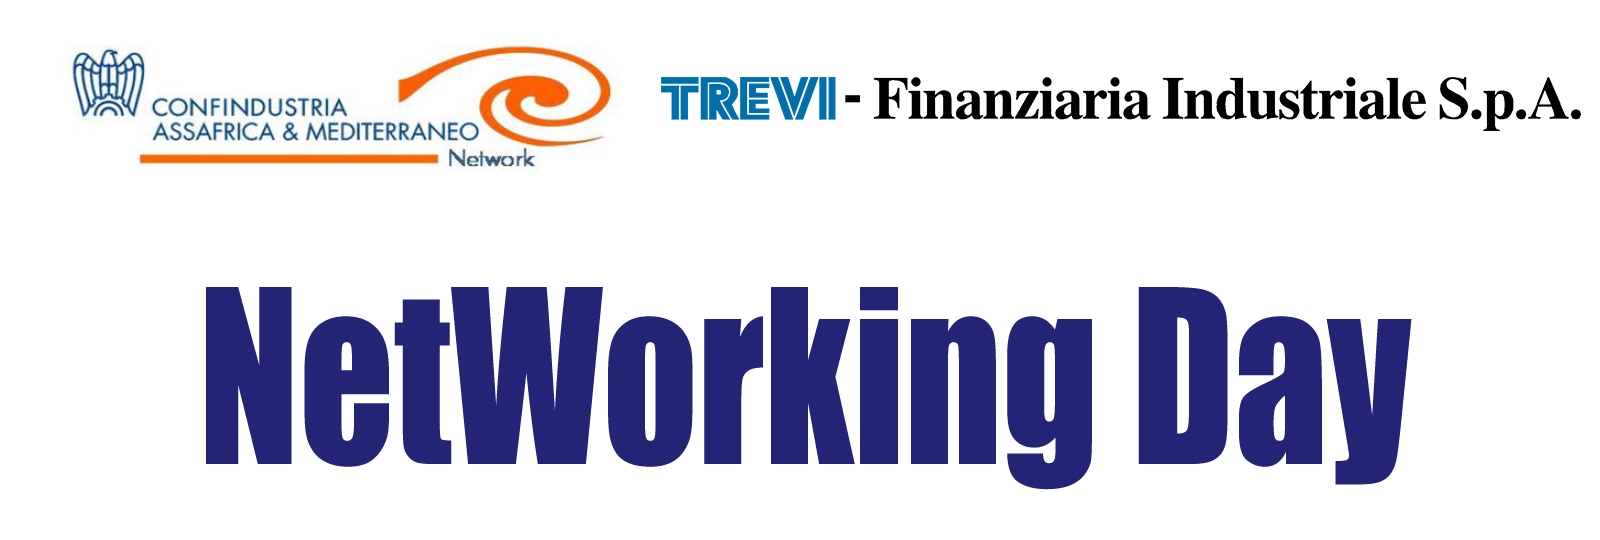 TREVI FINANZIARIA INDUSTRIALE AWARDED BY CONFINDUSTRIA ASSAFRICA & MEDITERRANEO FOR ITS VALUED MEMBERSHIP | News Trevi Group English site 1